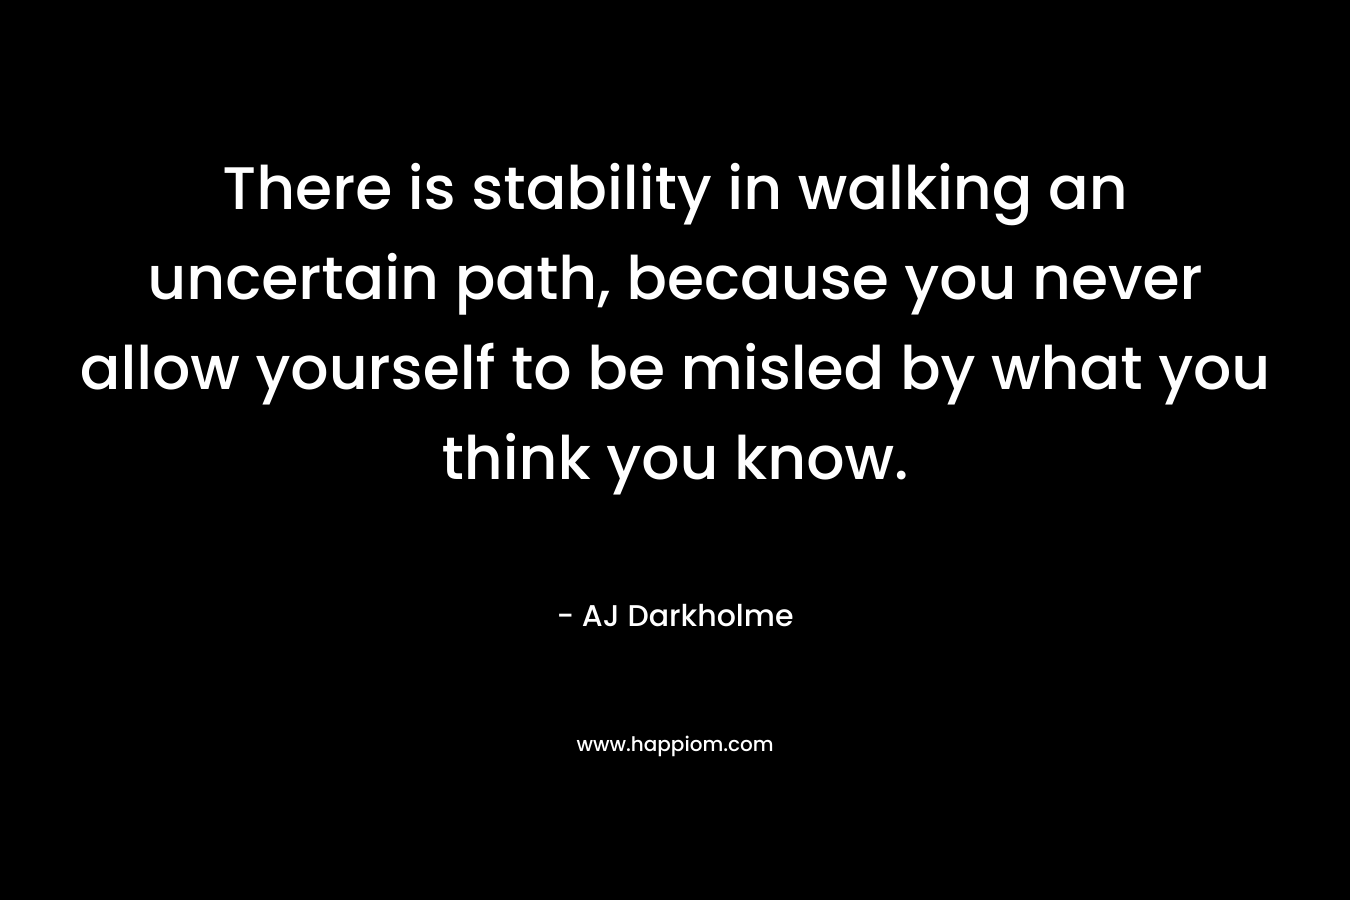 There is stability in walking an uncertain path, because you never allow yourself to be misled by what you think you know. – AJ Darkholme